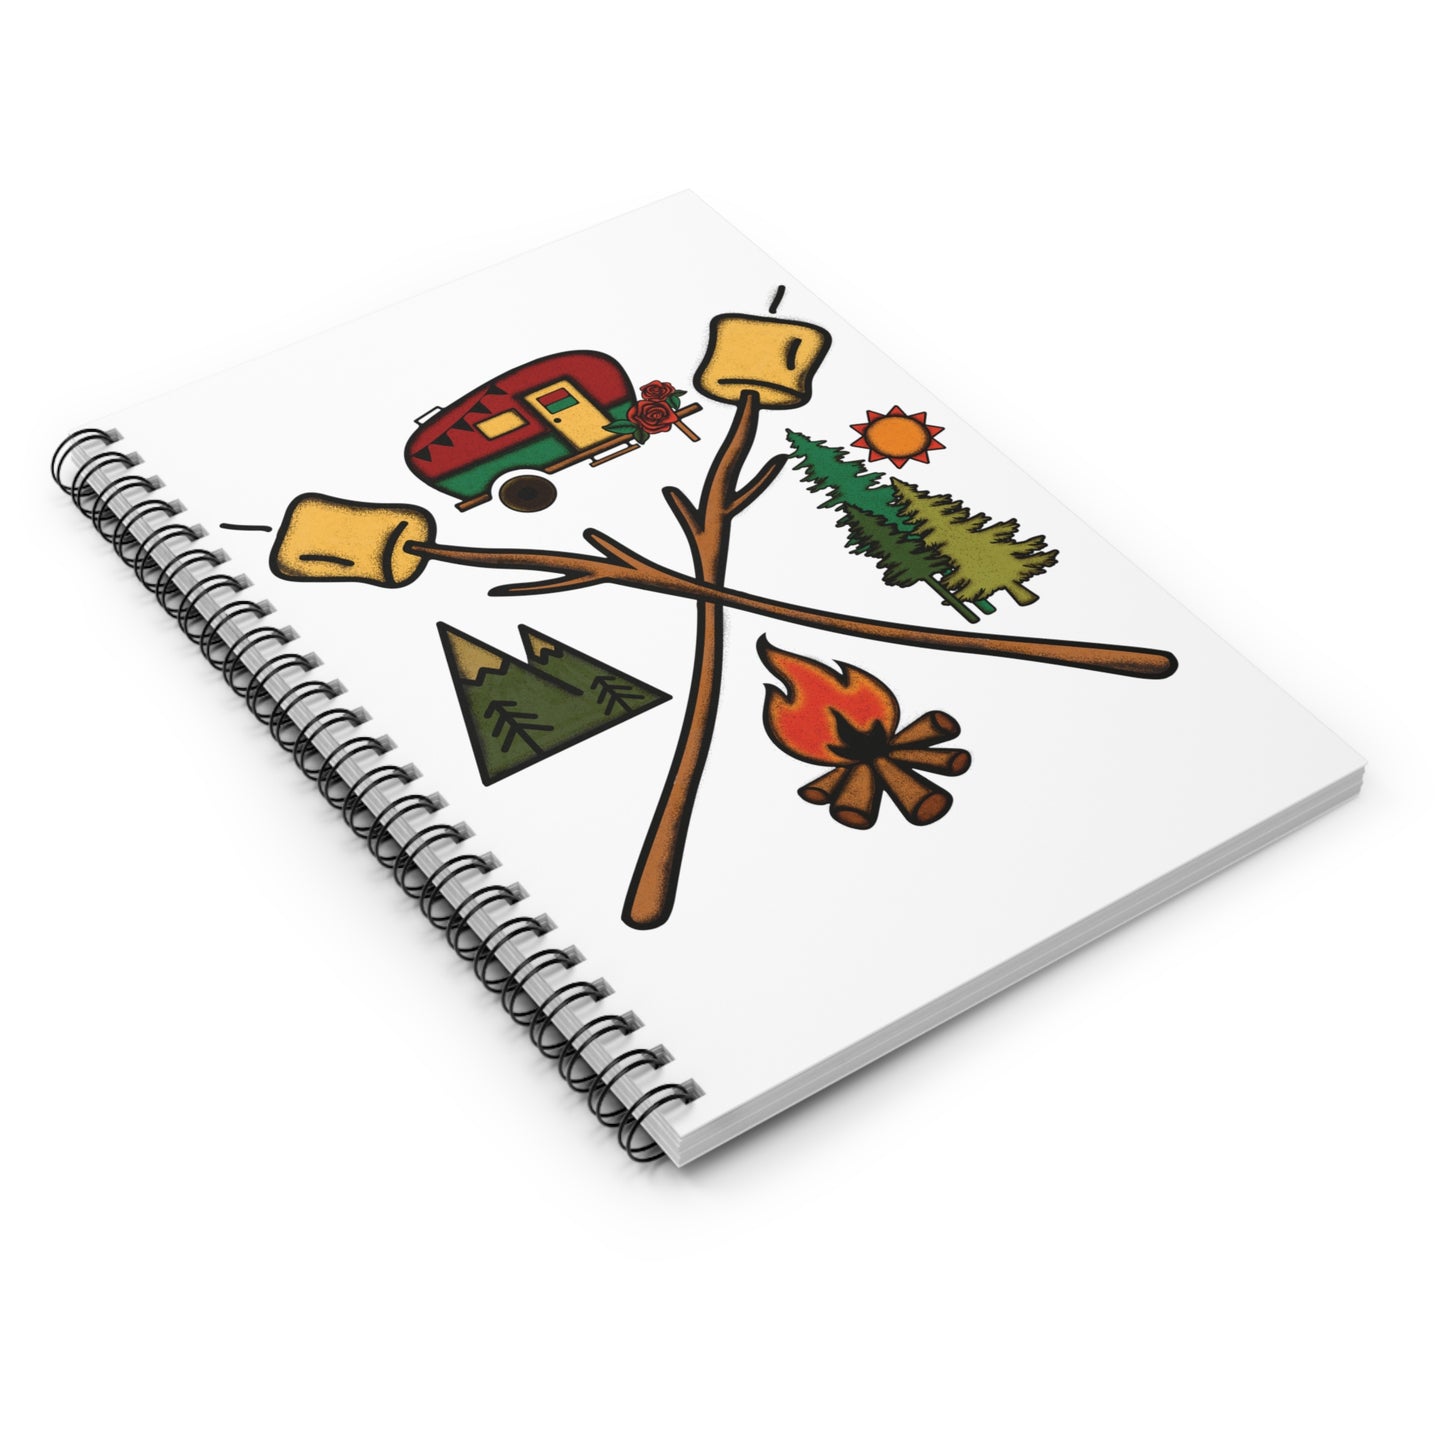 Camping Merit Badge: Spiral Notebook - Log Books - Journals - Diaries - and More Custom Printed by TheGlassyLass